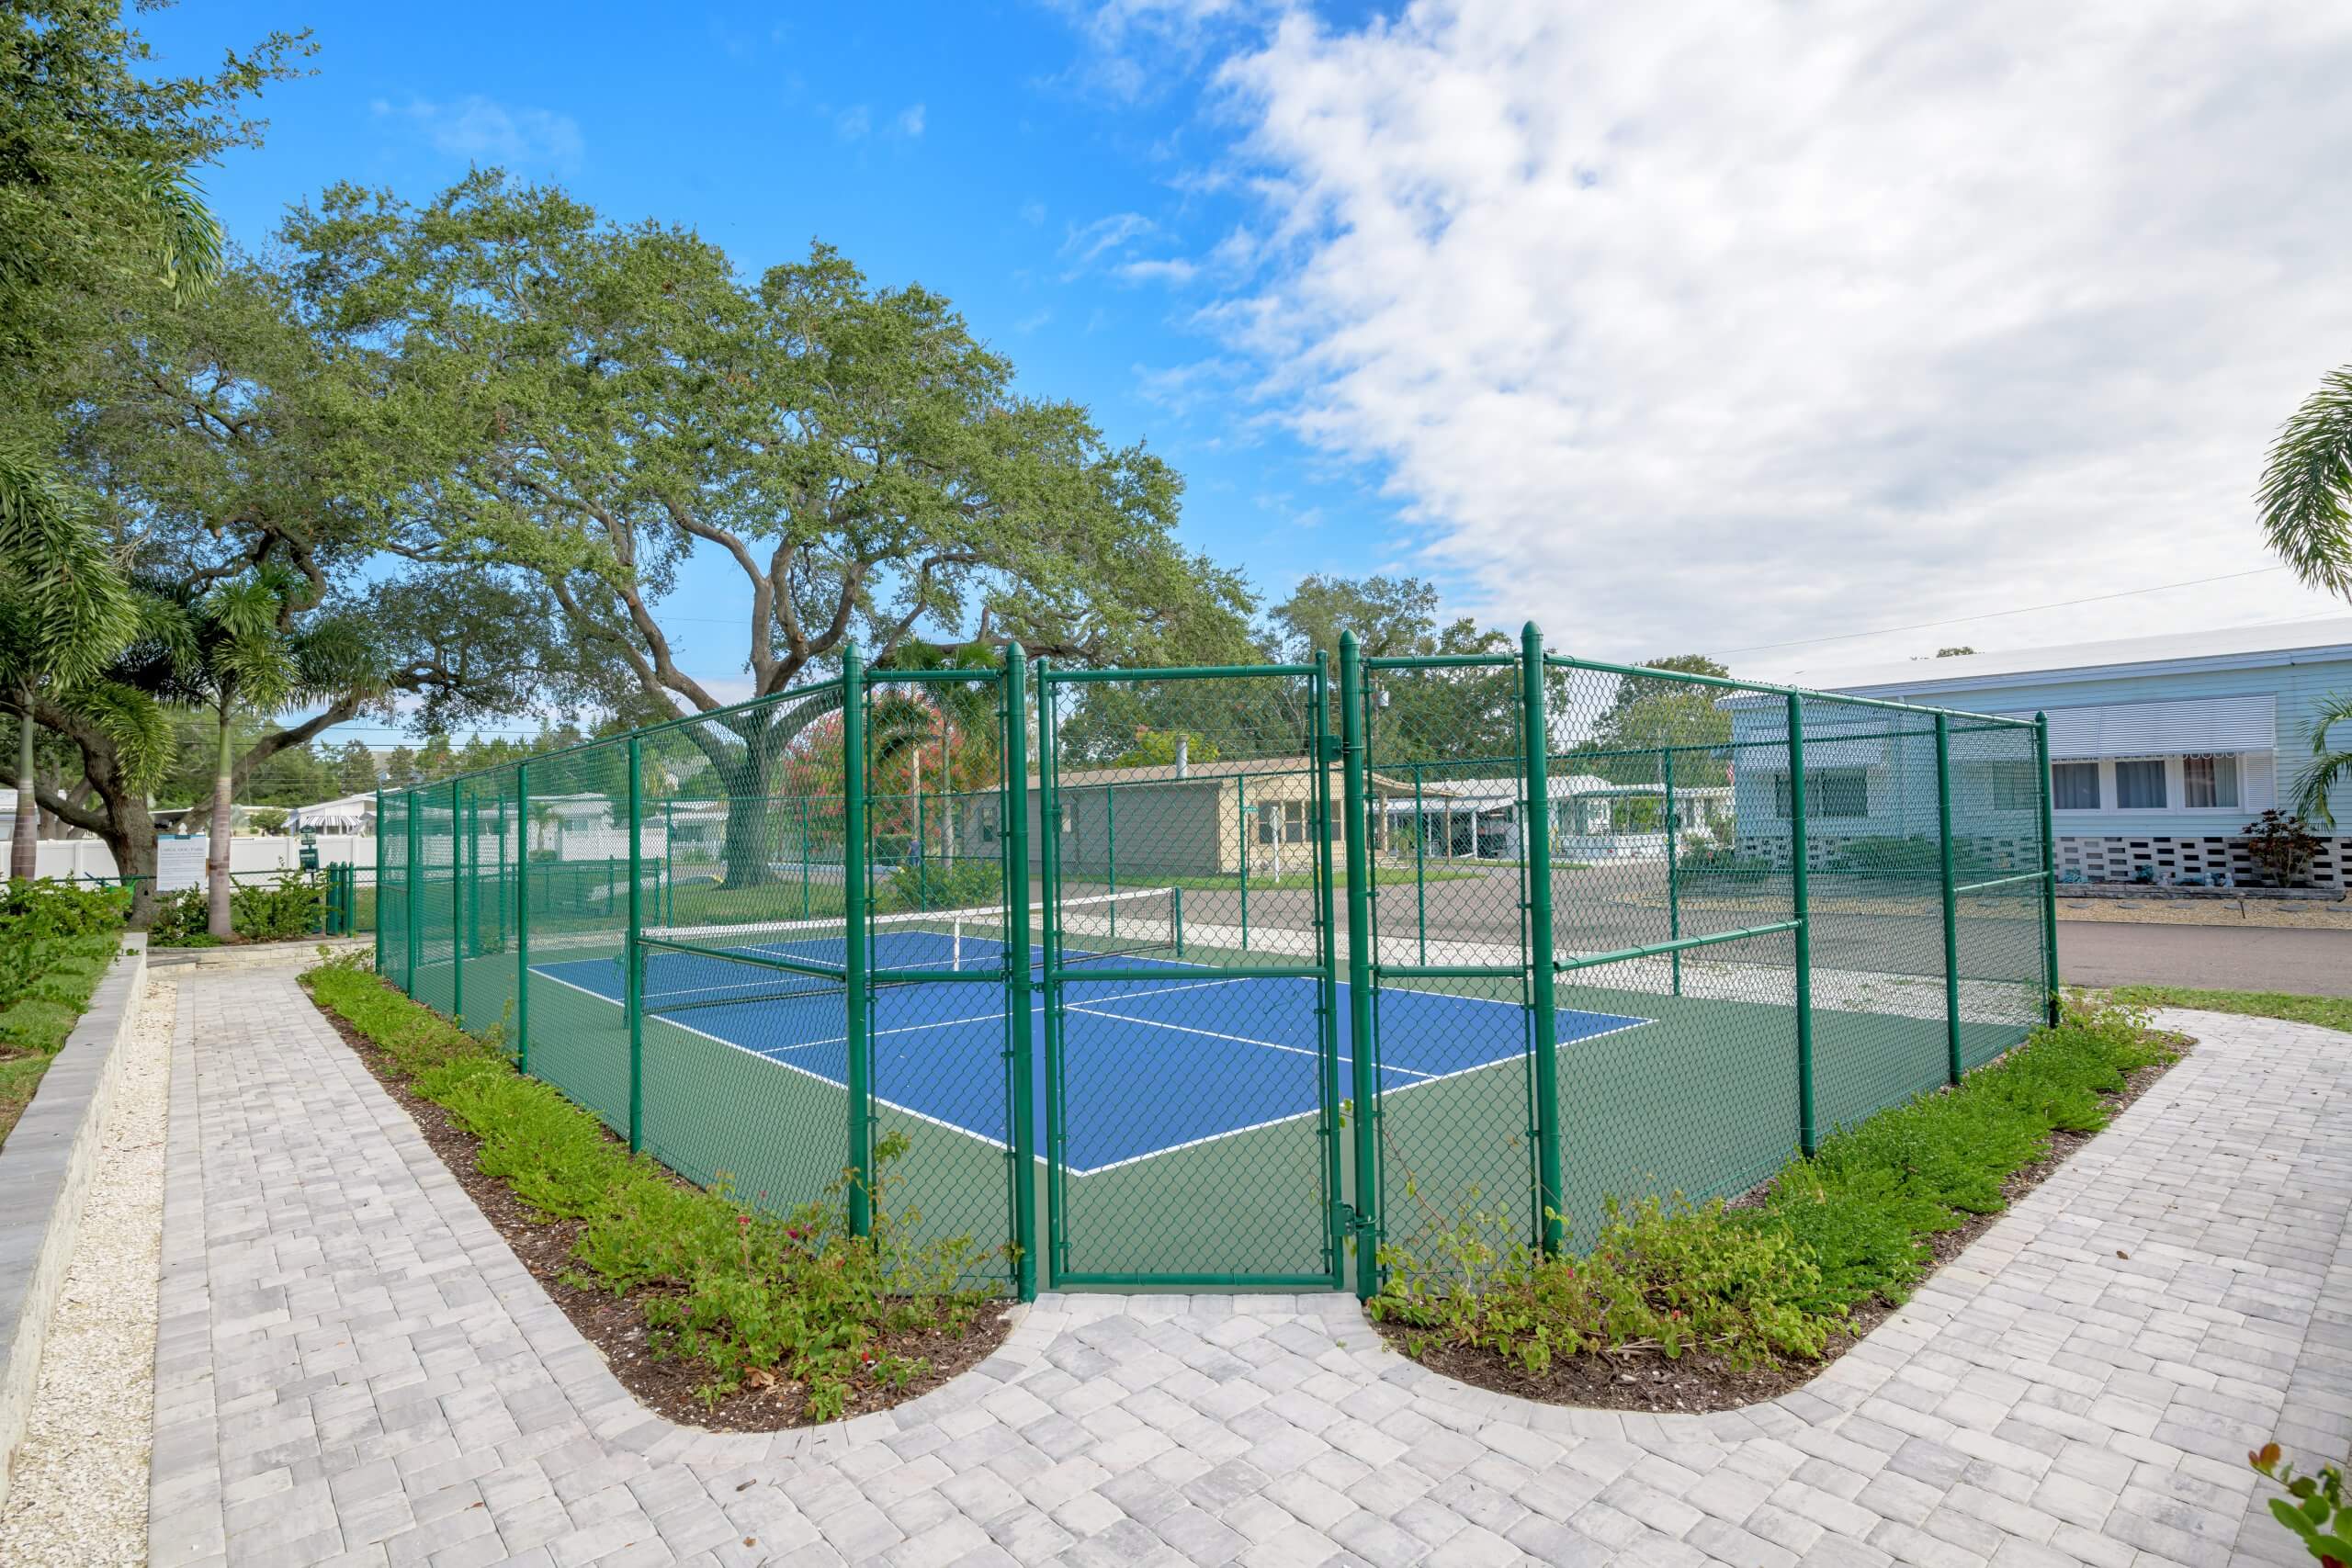 Community outdoor pickleball court enclosed by a green fence with surrounding trees and cobblestone pathways.